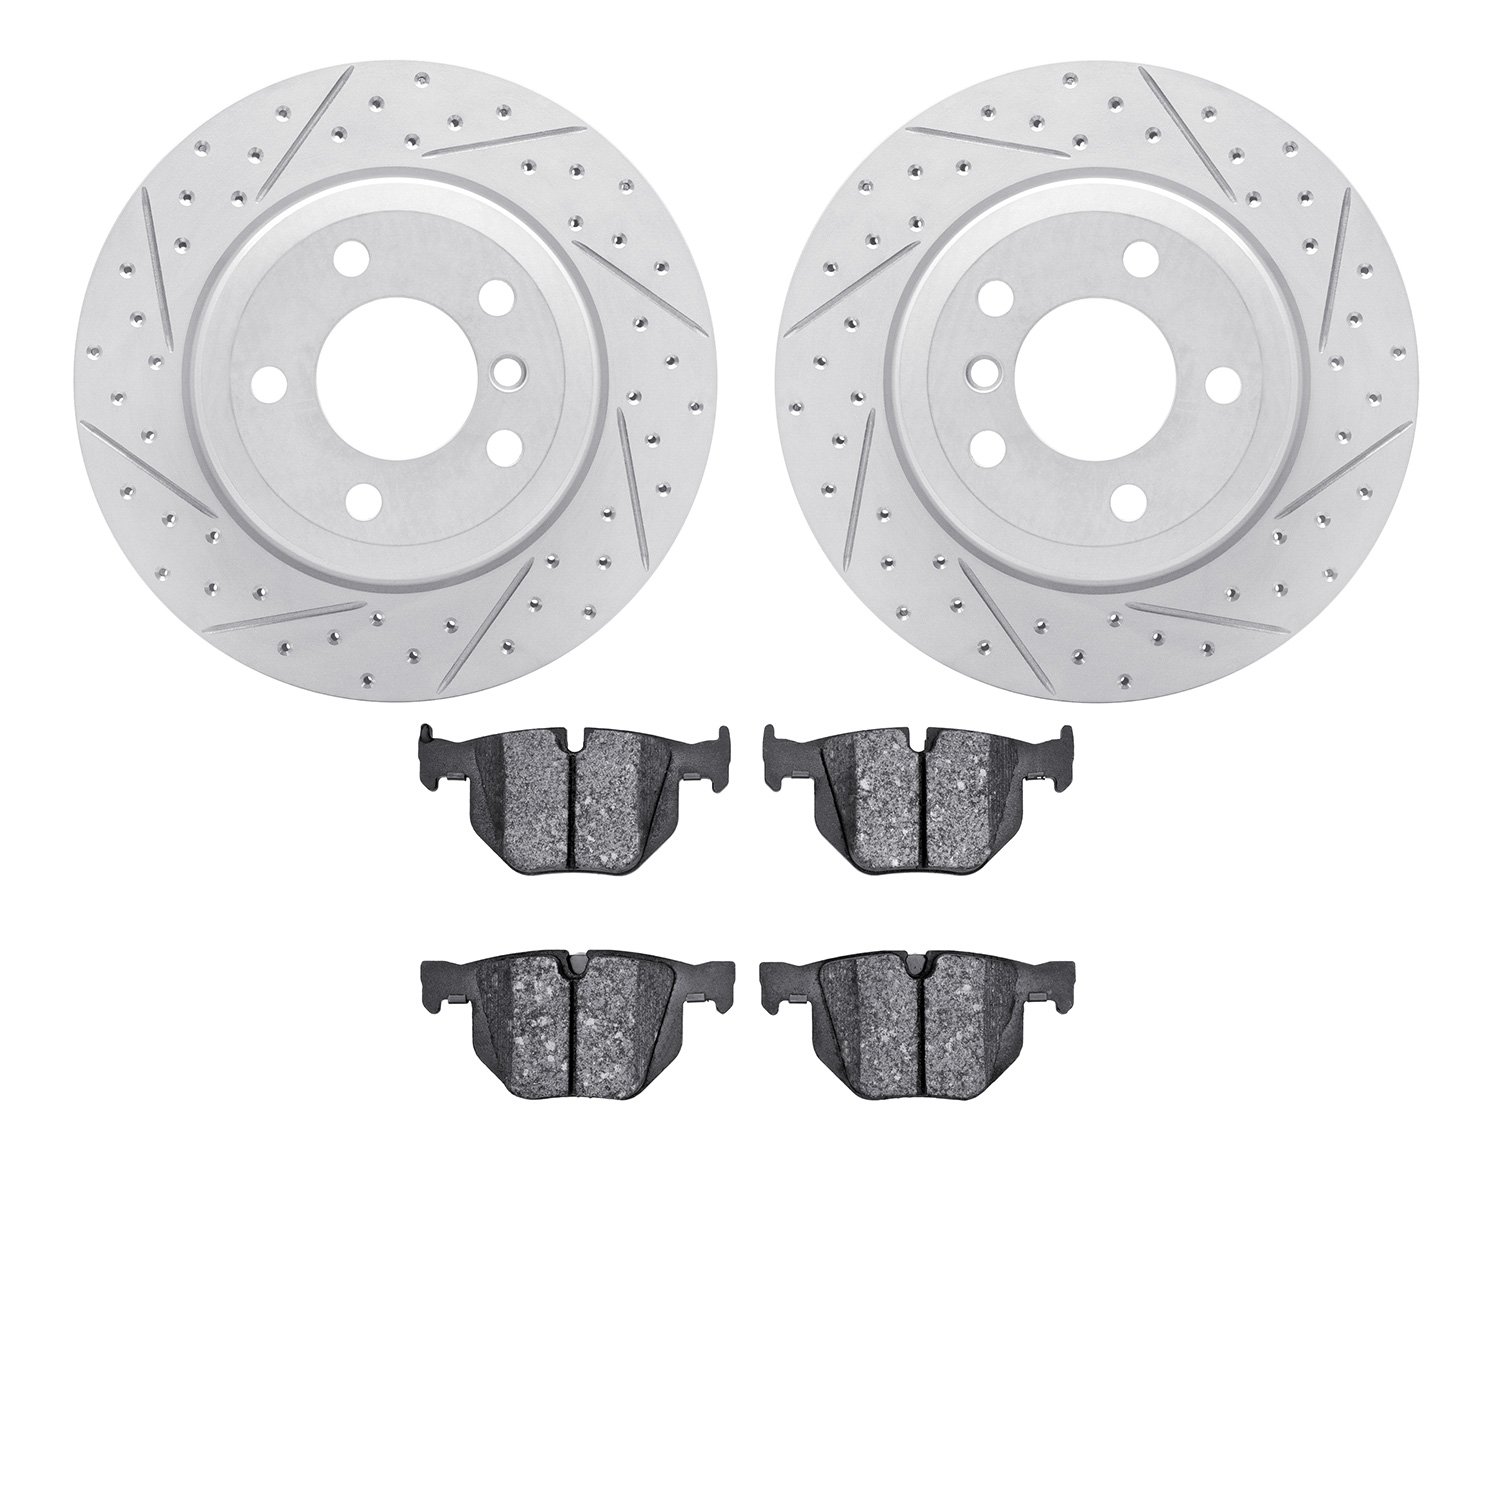 2502-31121 Geoperformance Drilled/Slotted Rotors w/5000 Advanced Brake Pads Kit, 2008-2019 BMW, Position: Rear